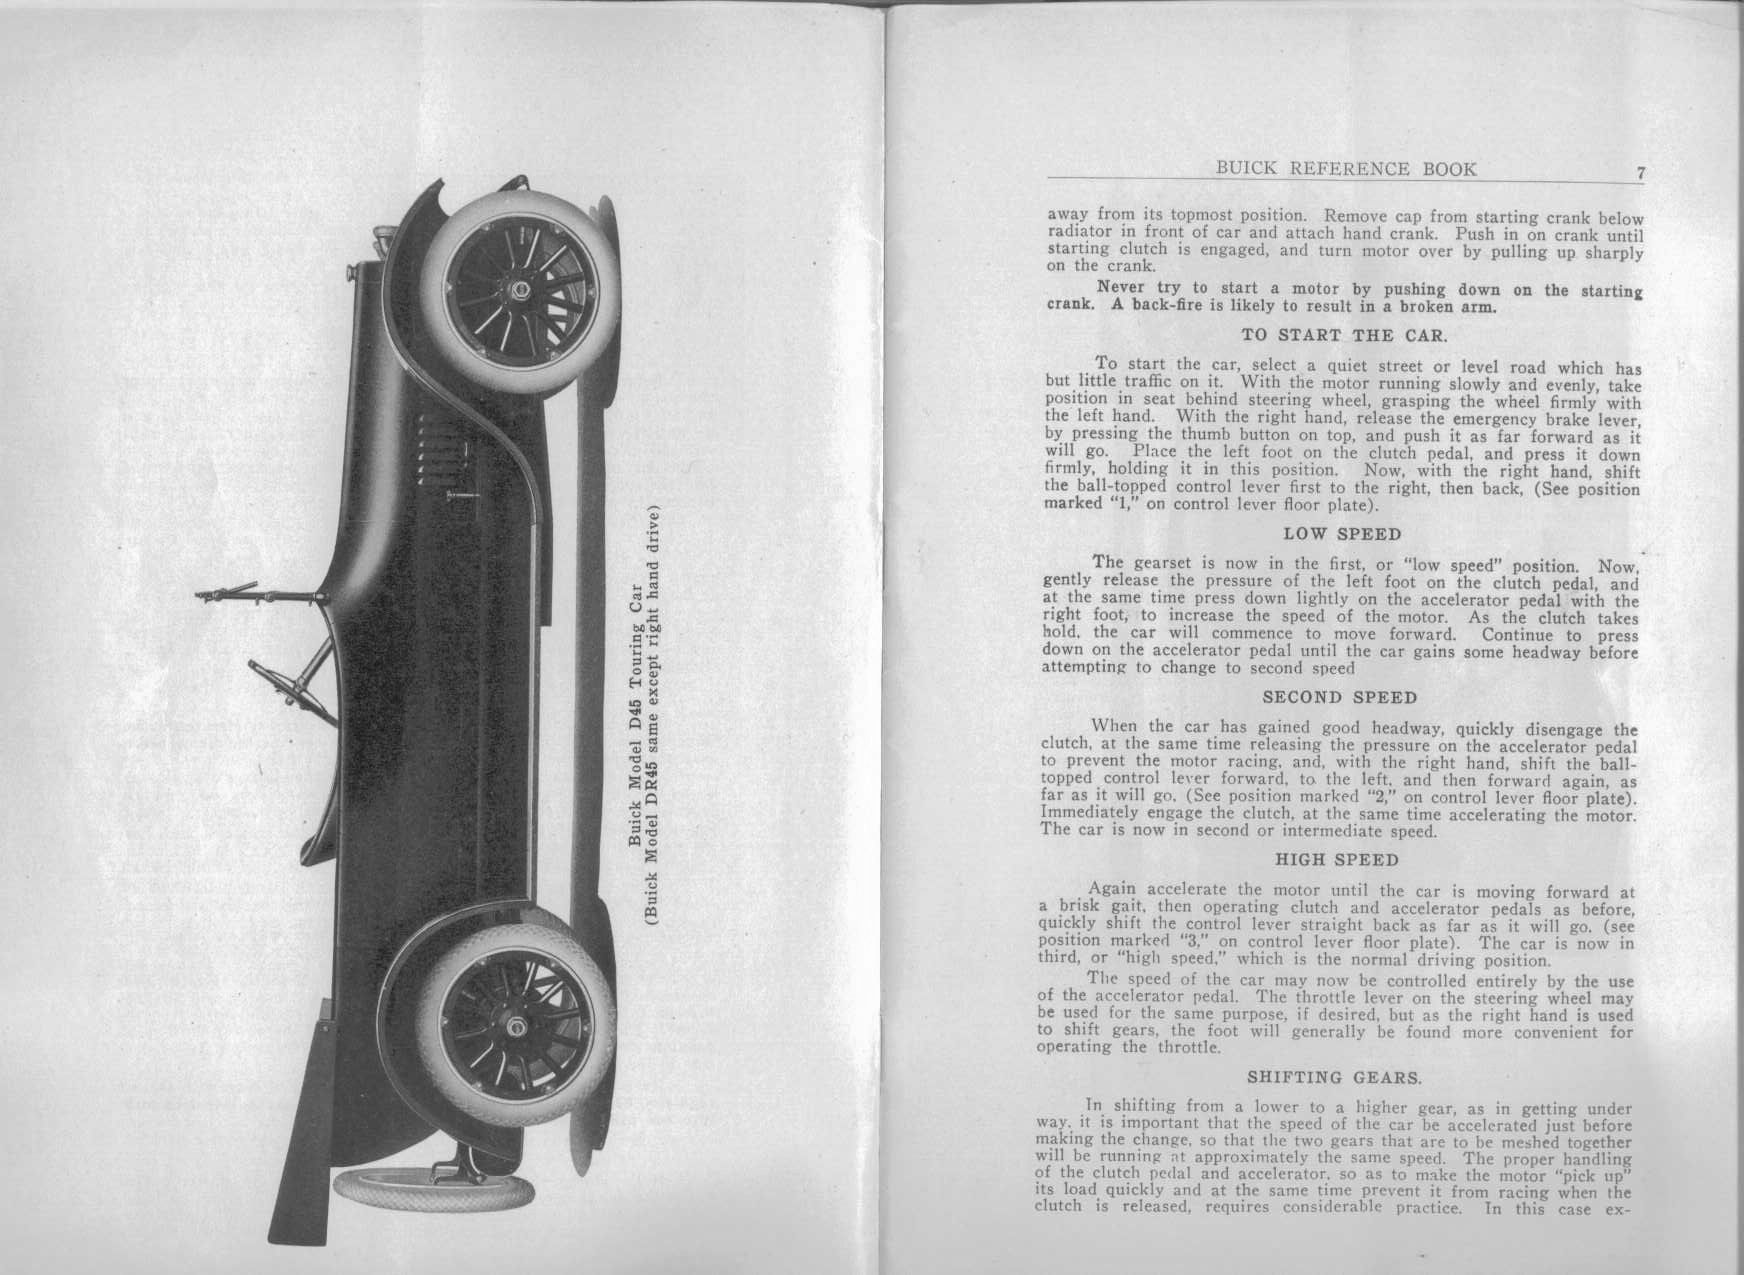 1916 Buick Reference Book-06-07